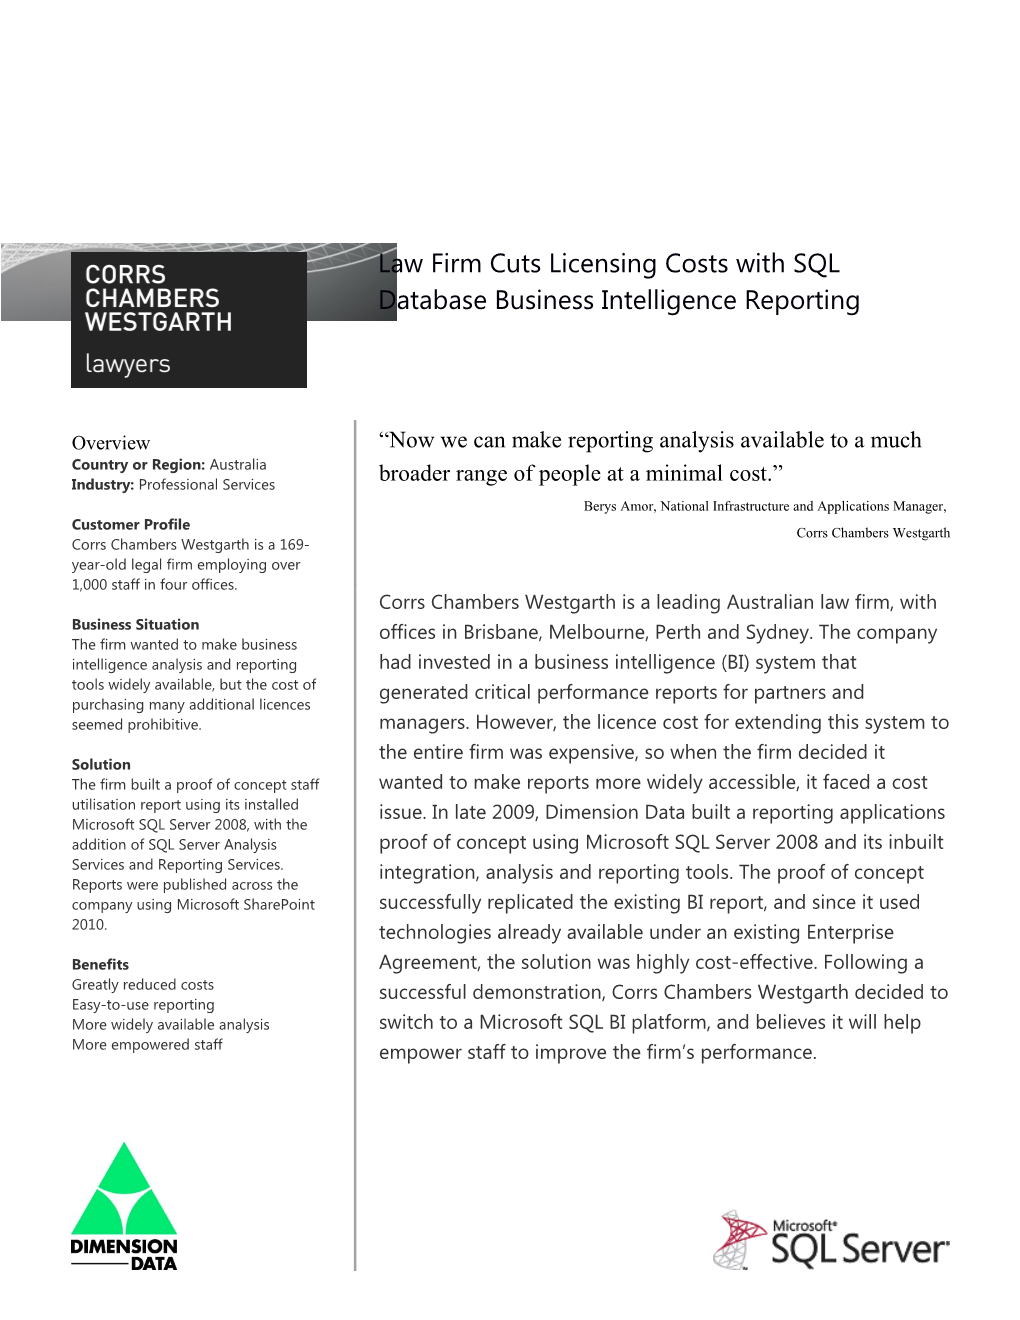 Metia CEP Law Firm Cuts Licensing Costs With SQL Database Business Intelligence Reporting